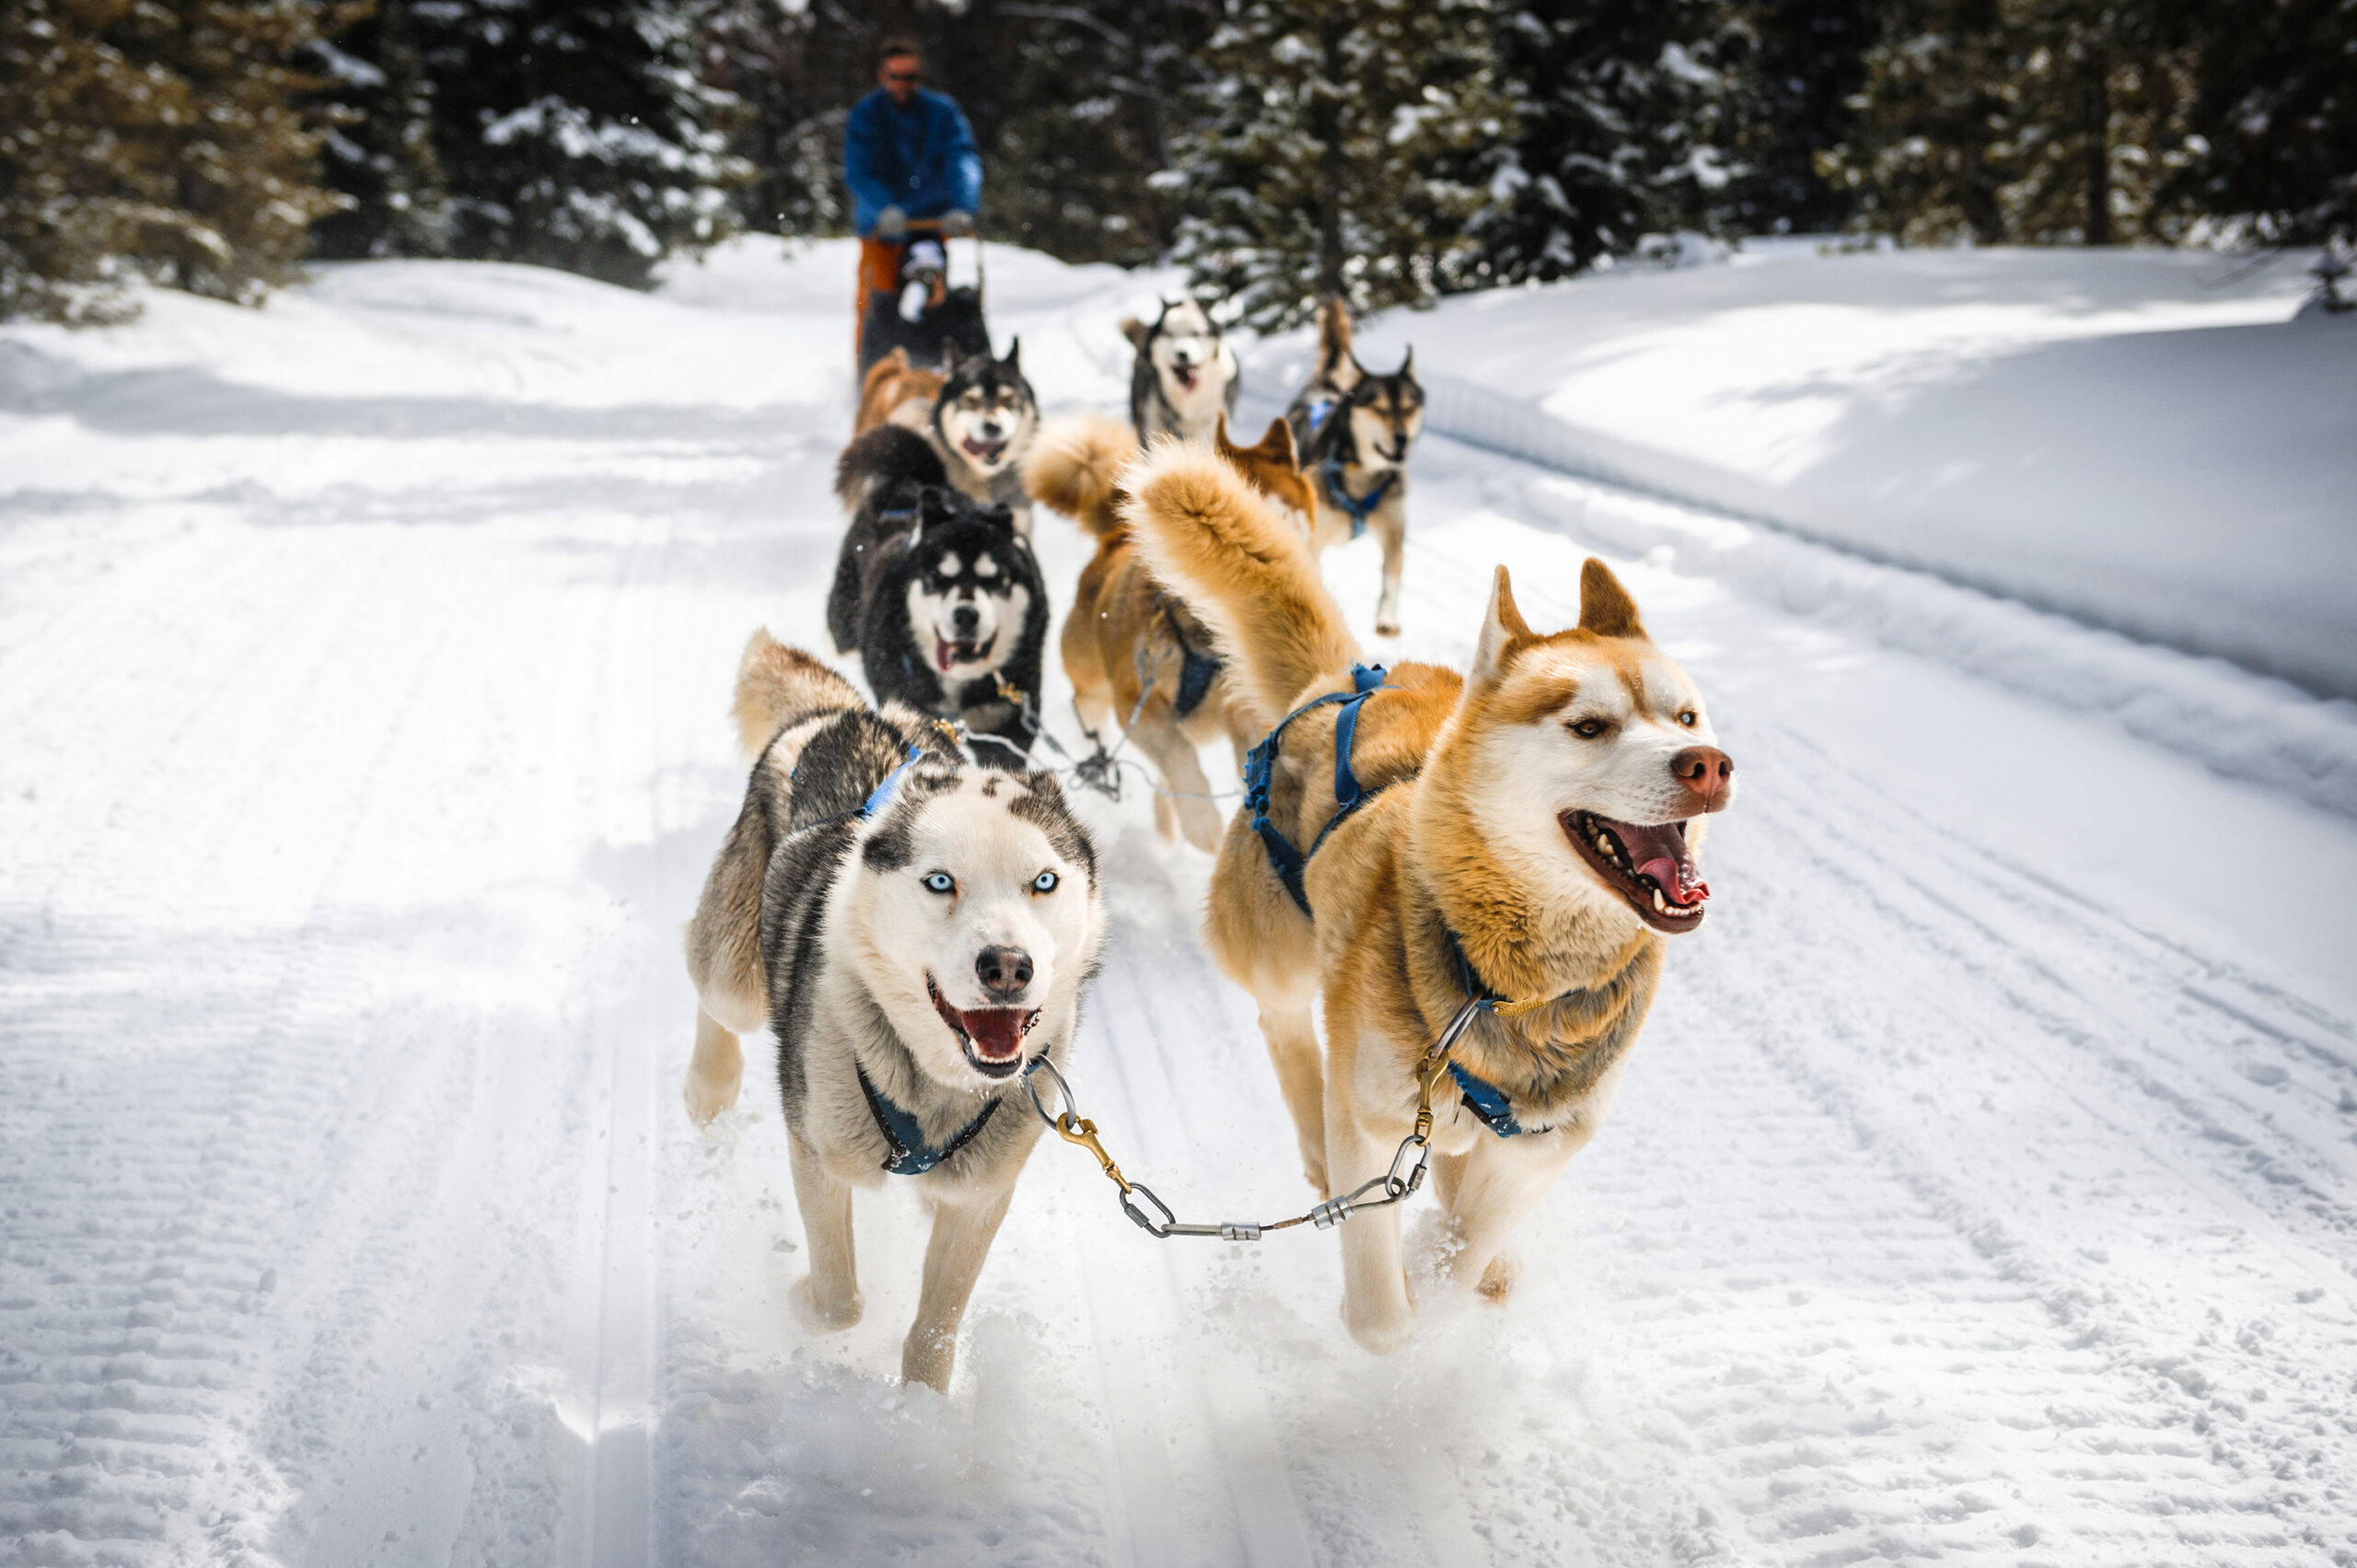 Front view of sled dogs running with musher behind them. Dogs have mouth open